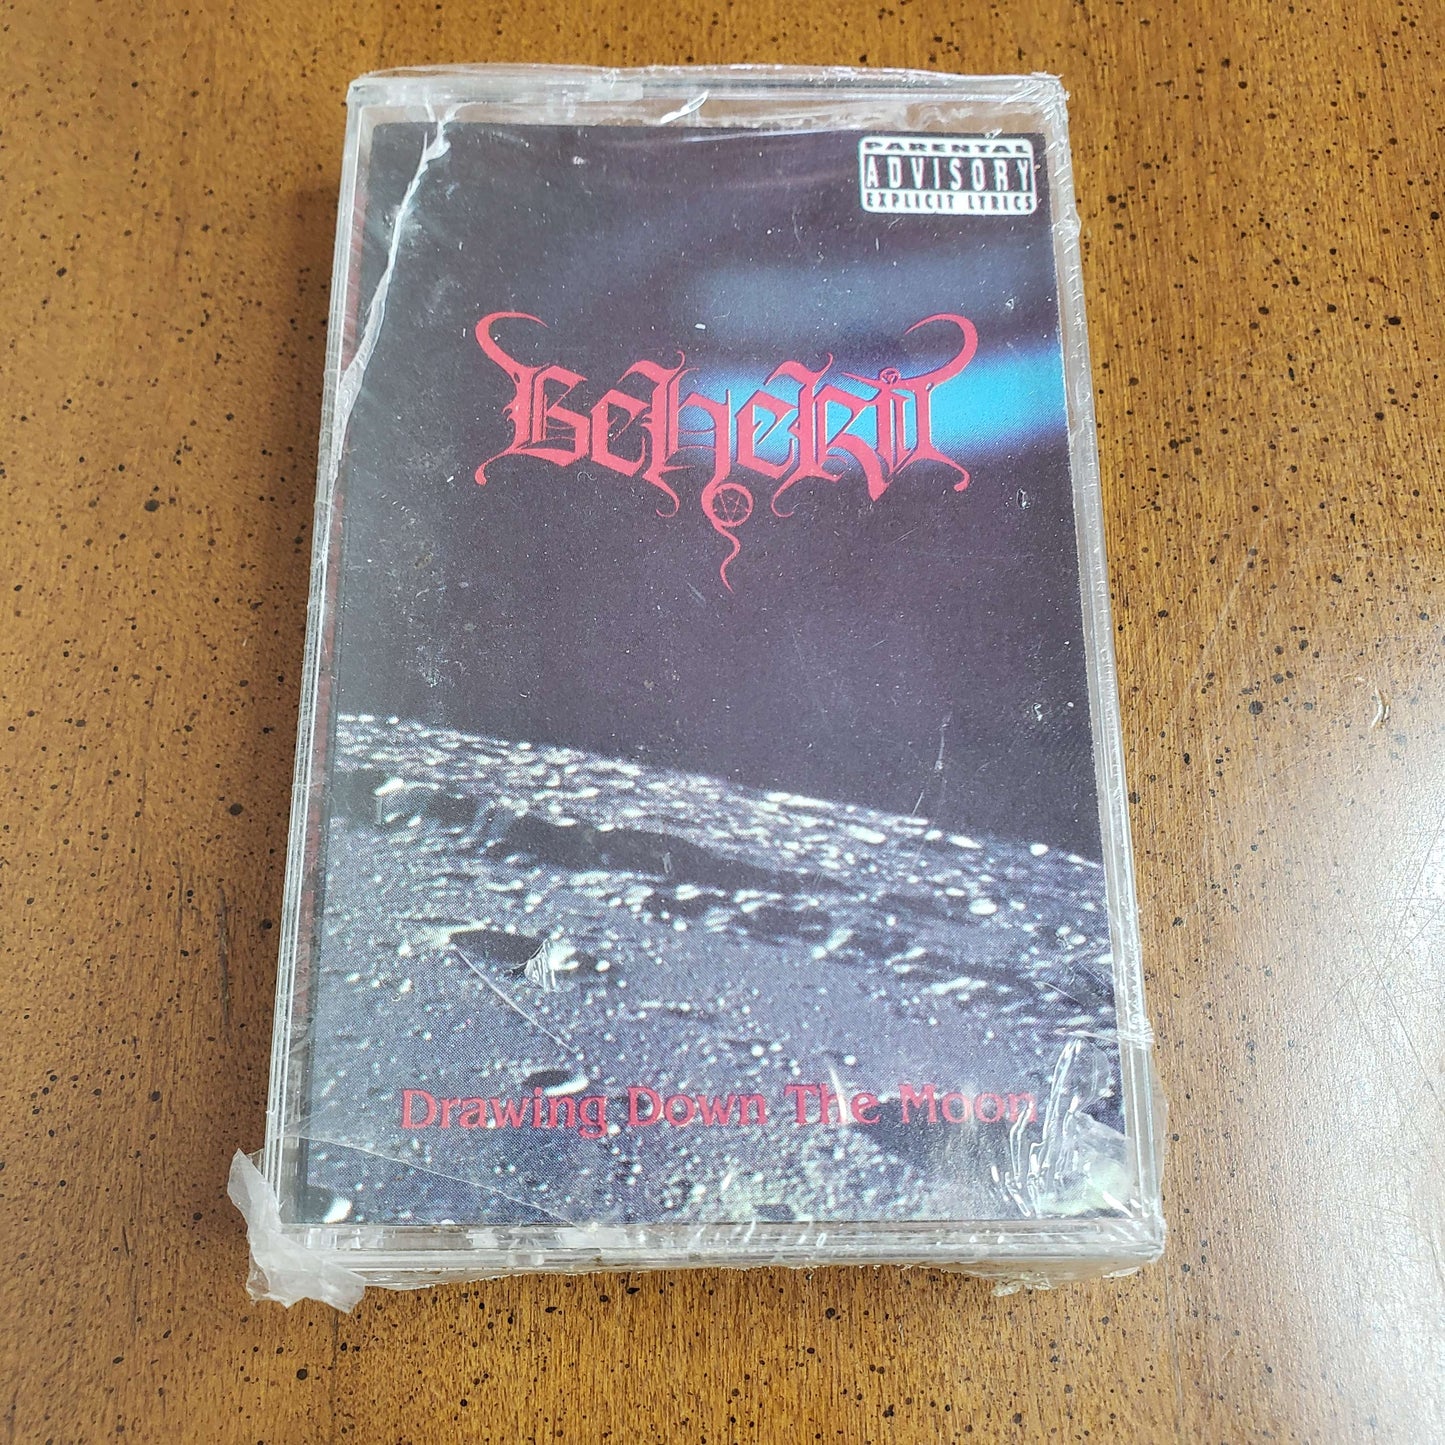 Beherit - Drawing Down the Moon original sealed cassette tape